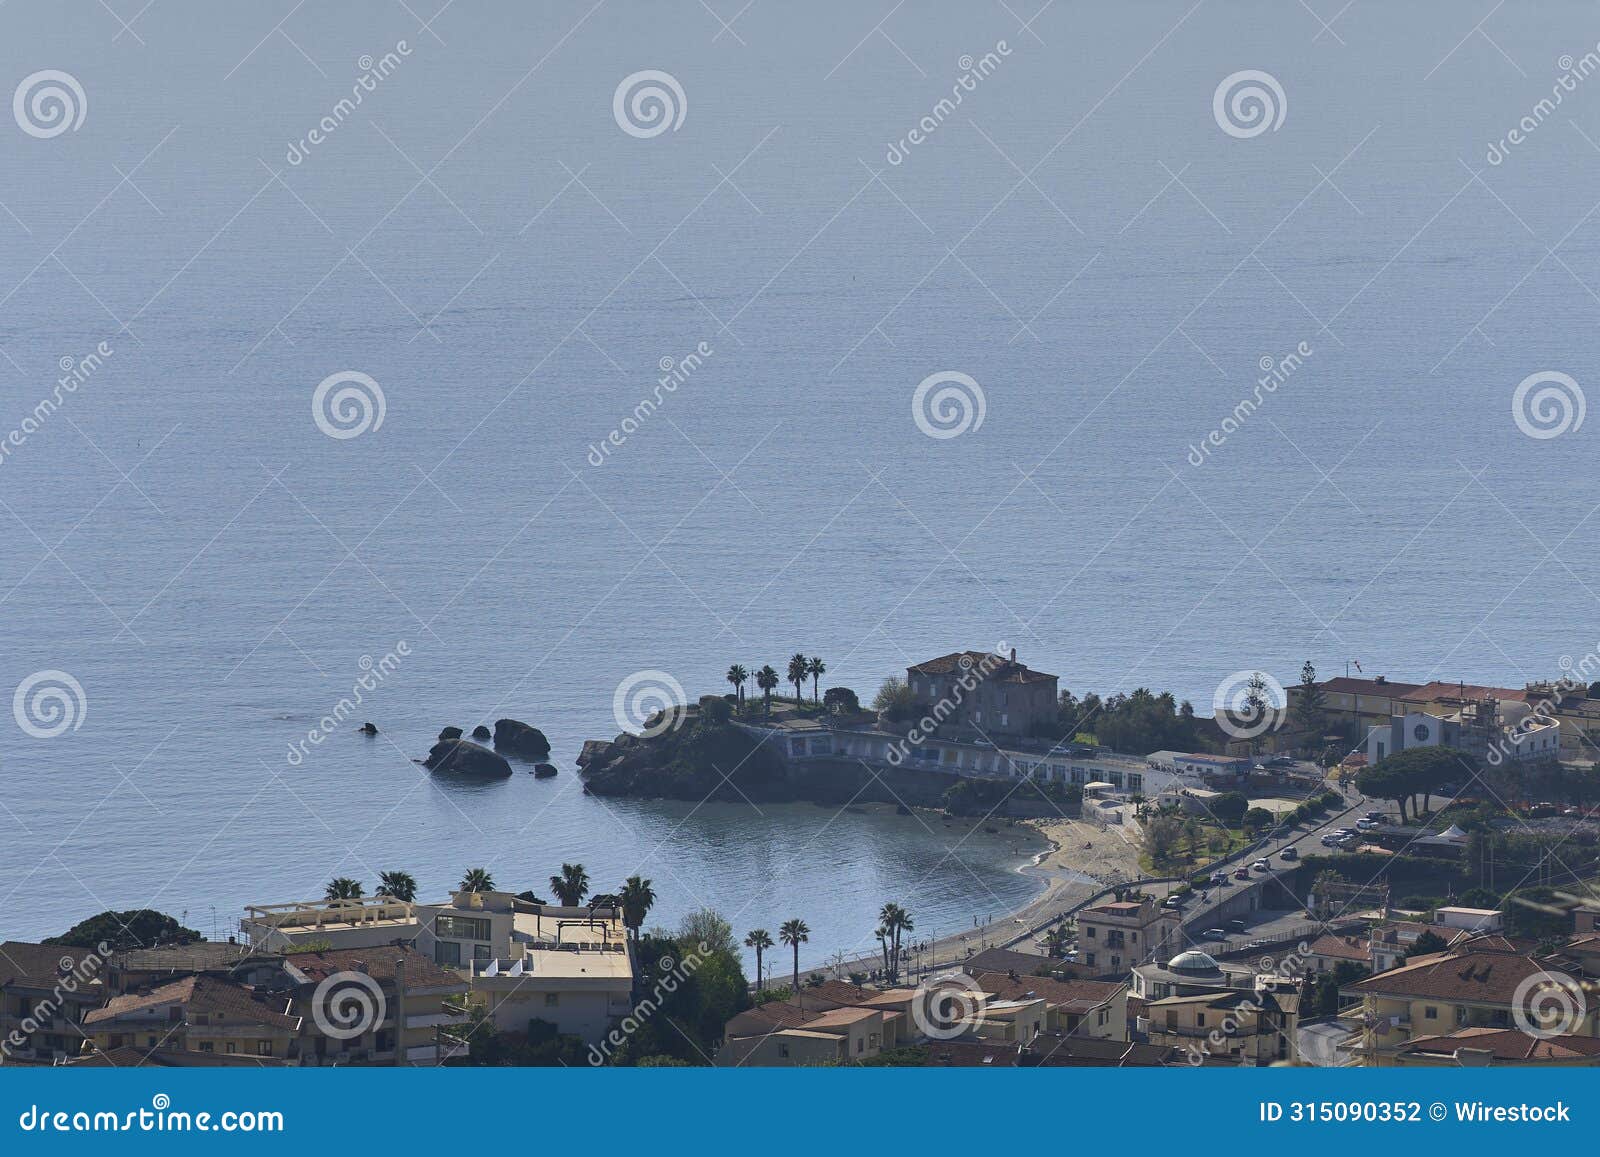 waterfront town with buildings in belvedere marittimo, cosenza, calabria, italy